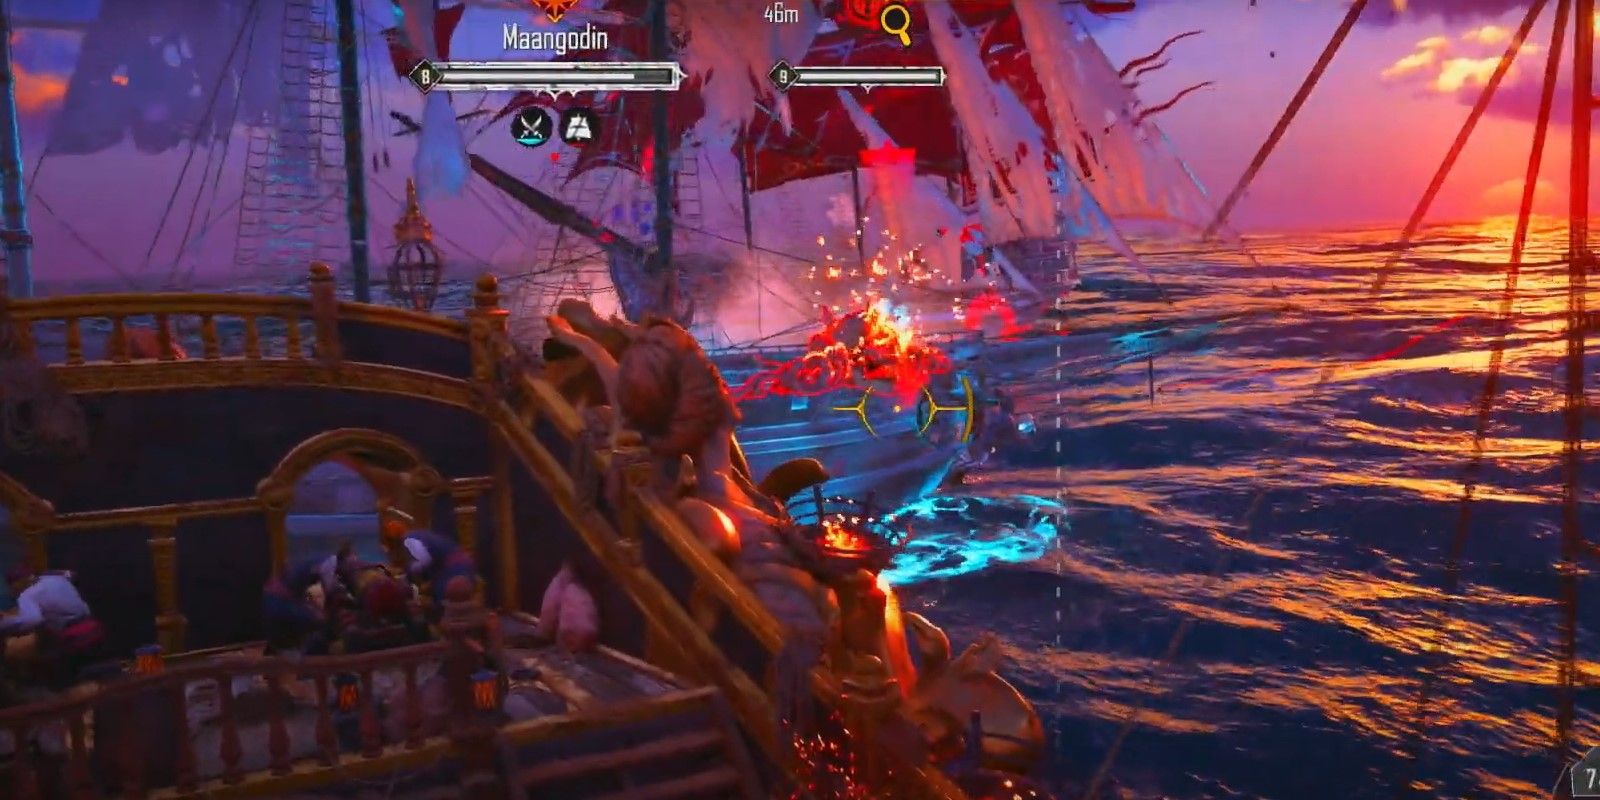 The Skull And Bones character is attacking the Maangodin Ghost Ship so they can loot it.